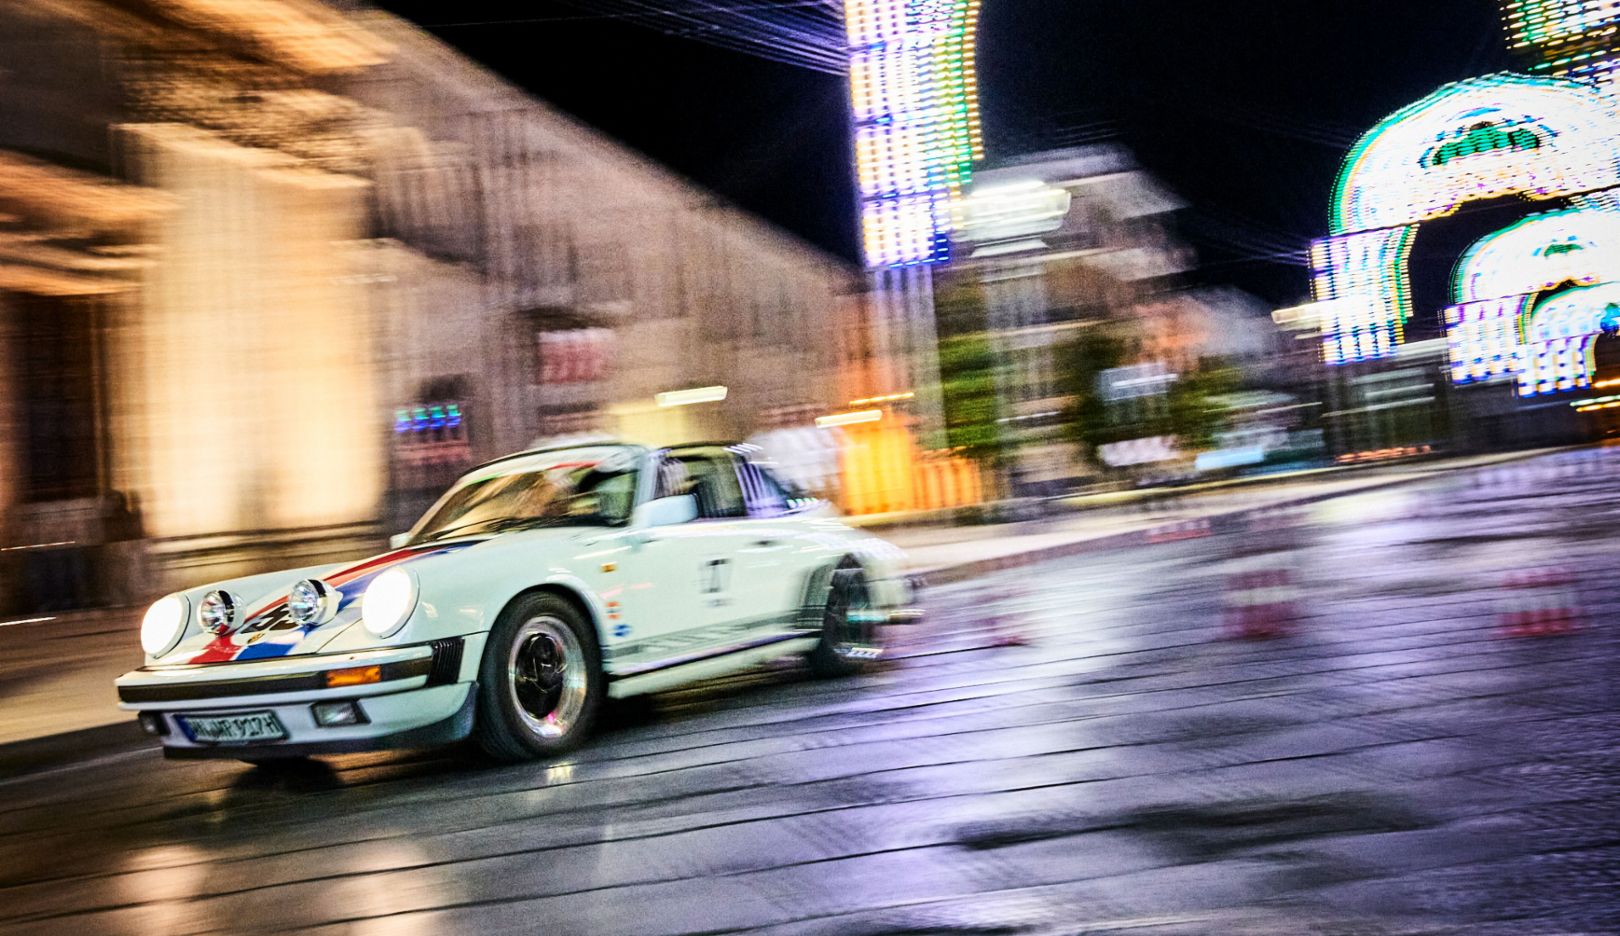 Highlight in the night: The 911 Carrera Targa, built in 1986, on its regularity rally through Manduria, which is radiant with festive lights.